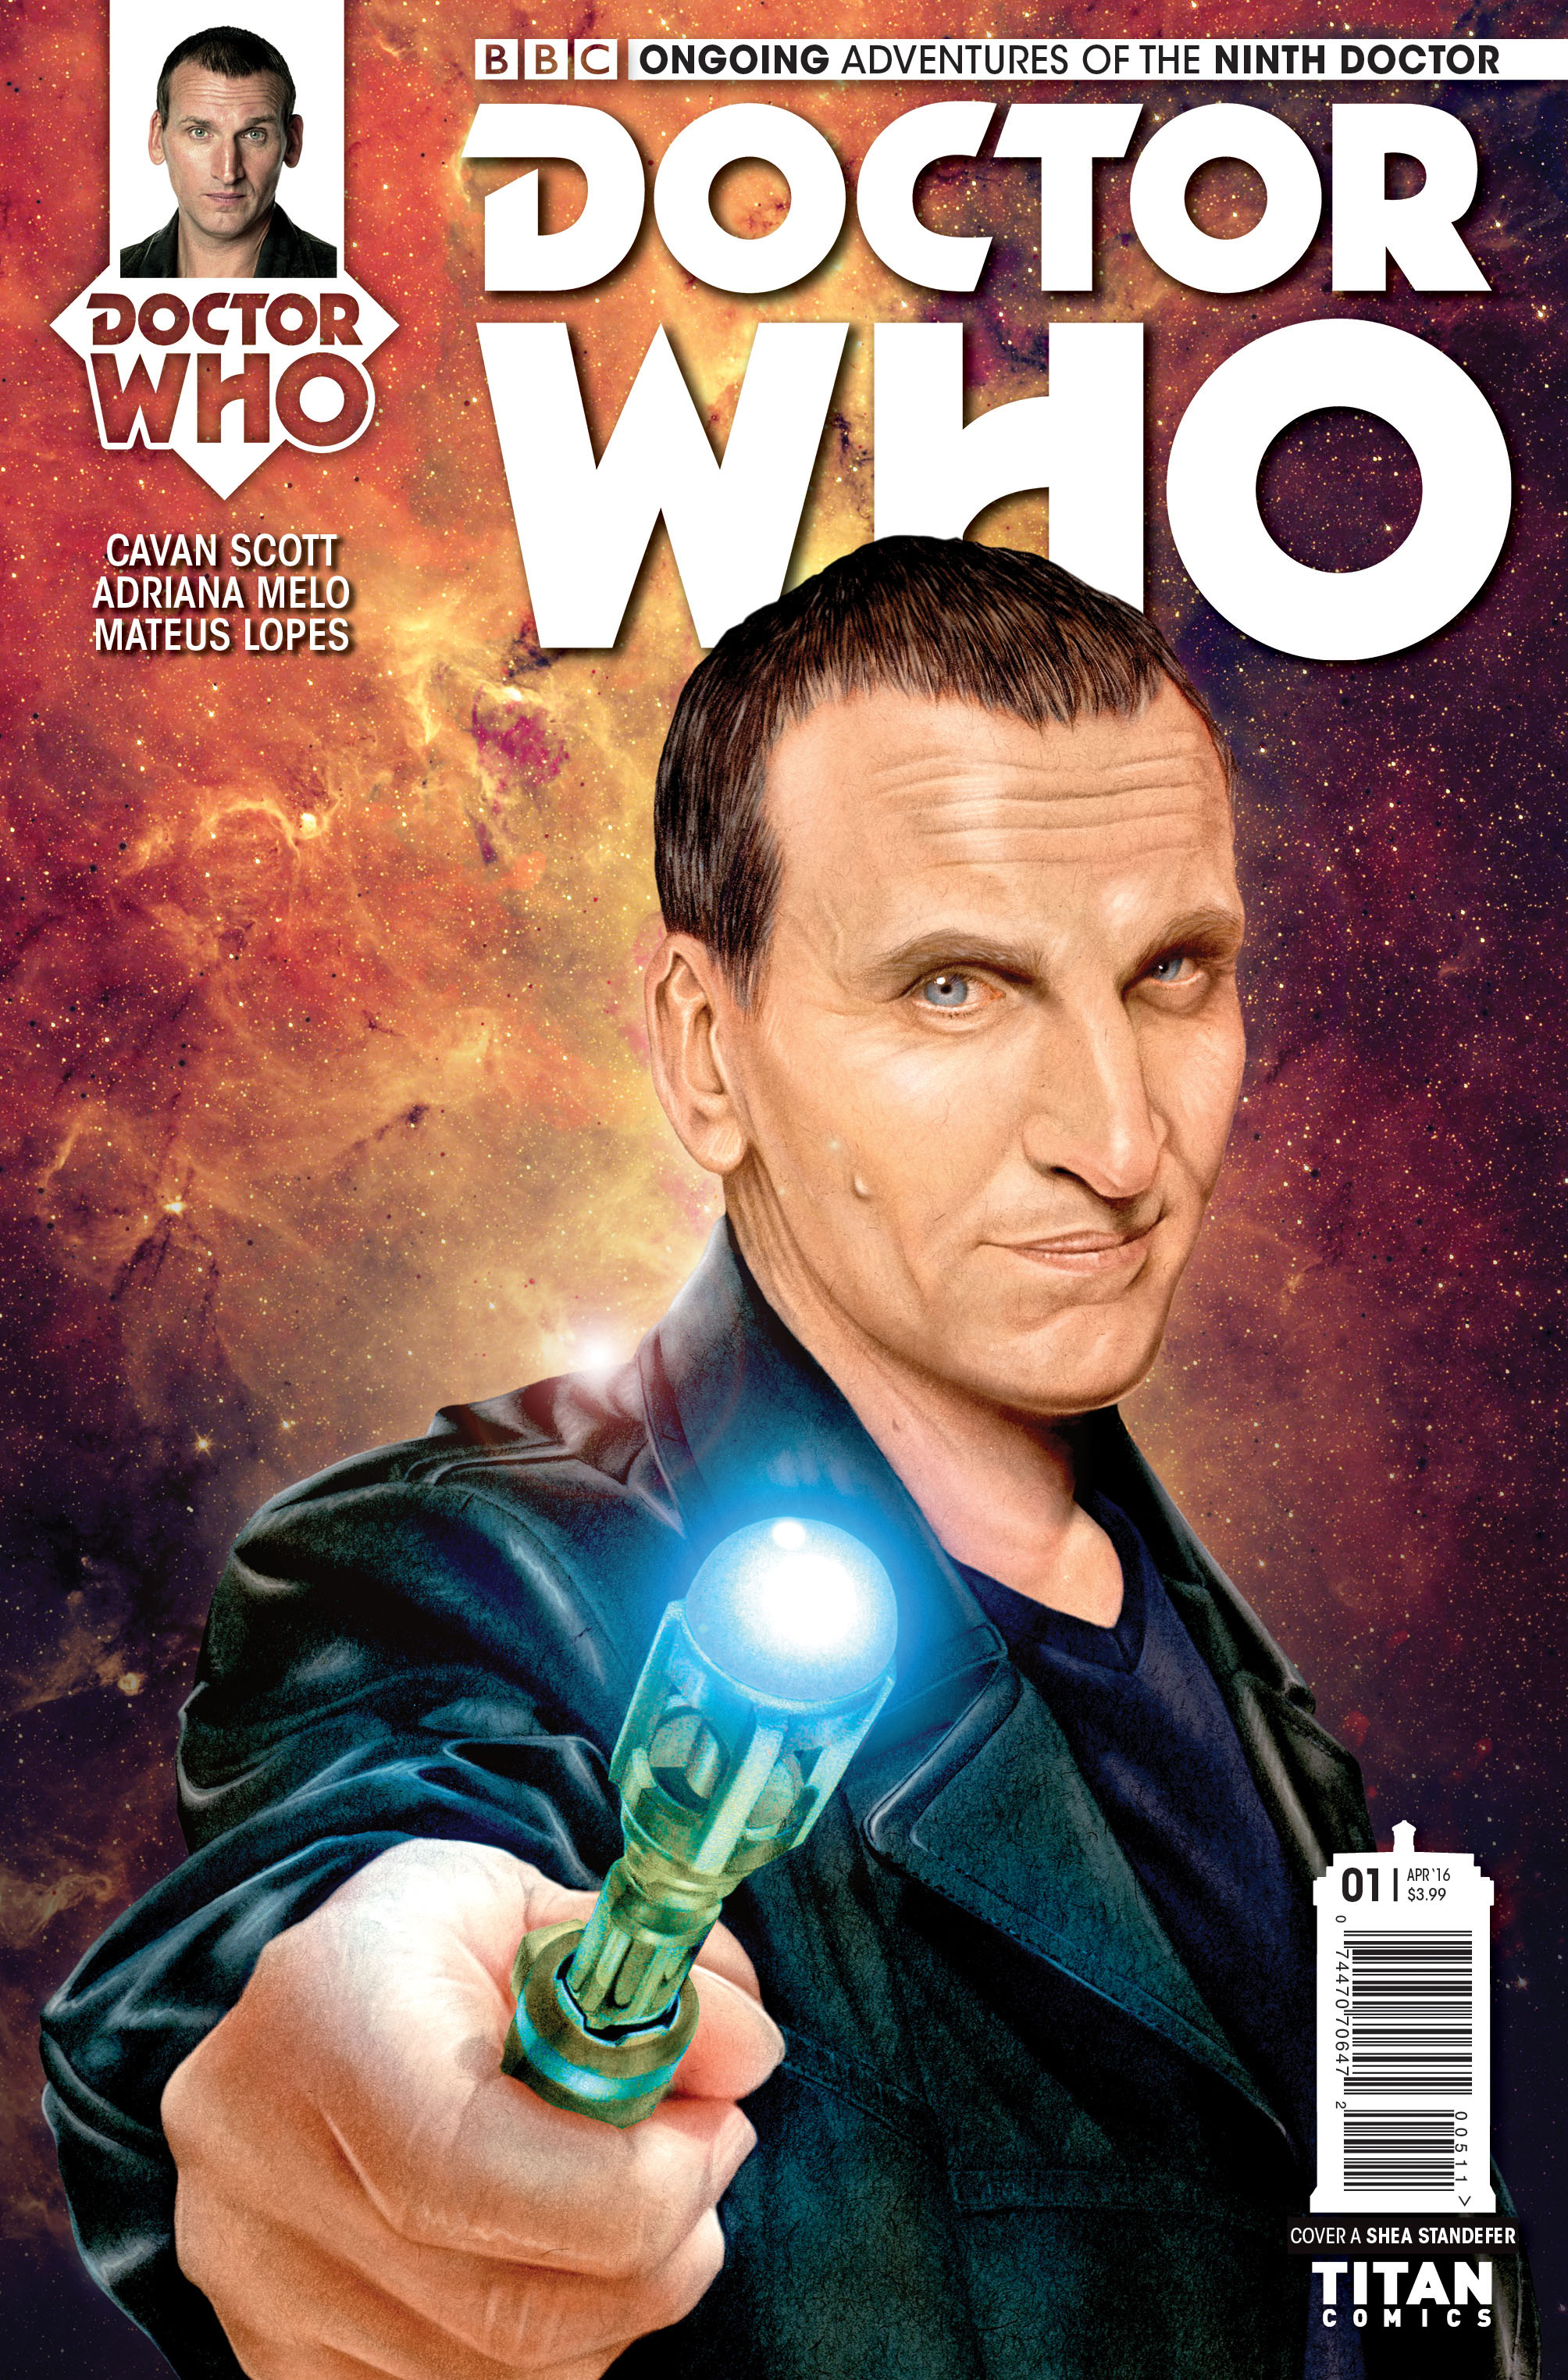 Doctor Who: The Ninth Doctor #1 Ongoing Cover A by Shea Standefer